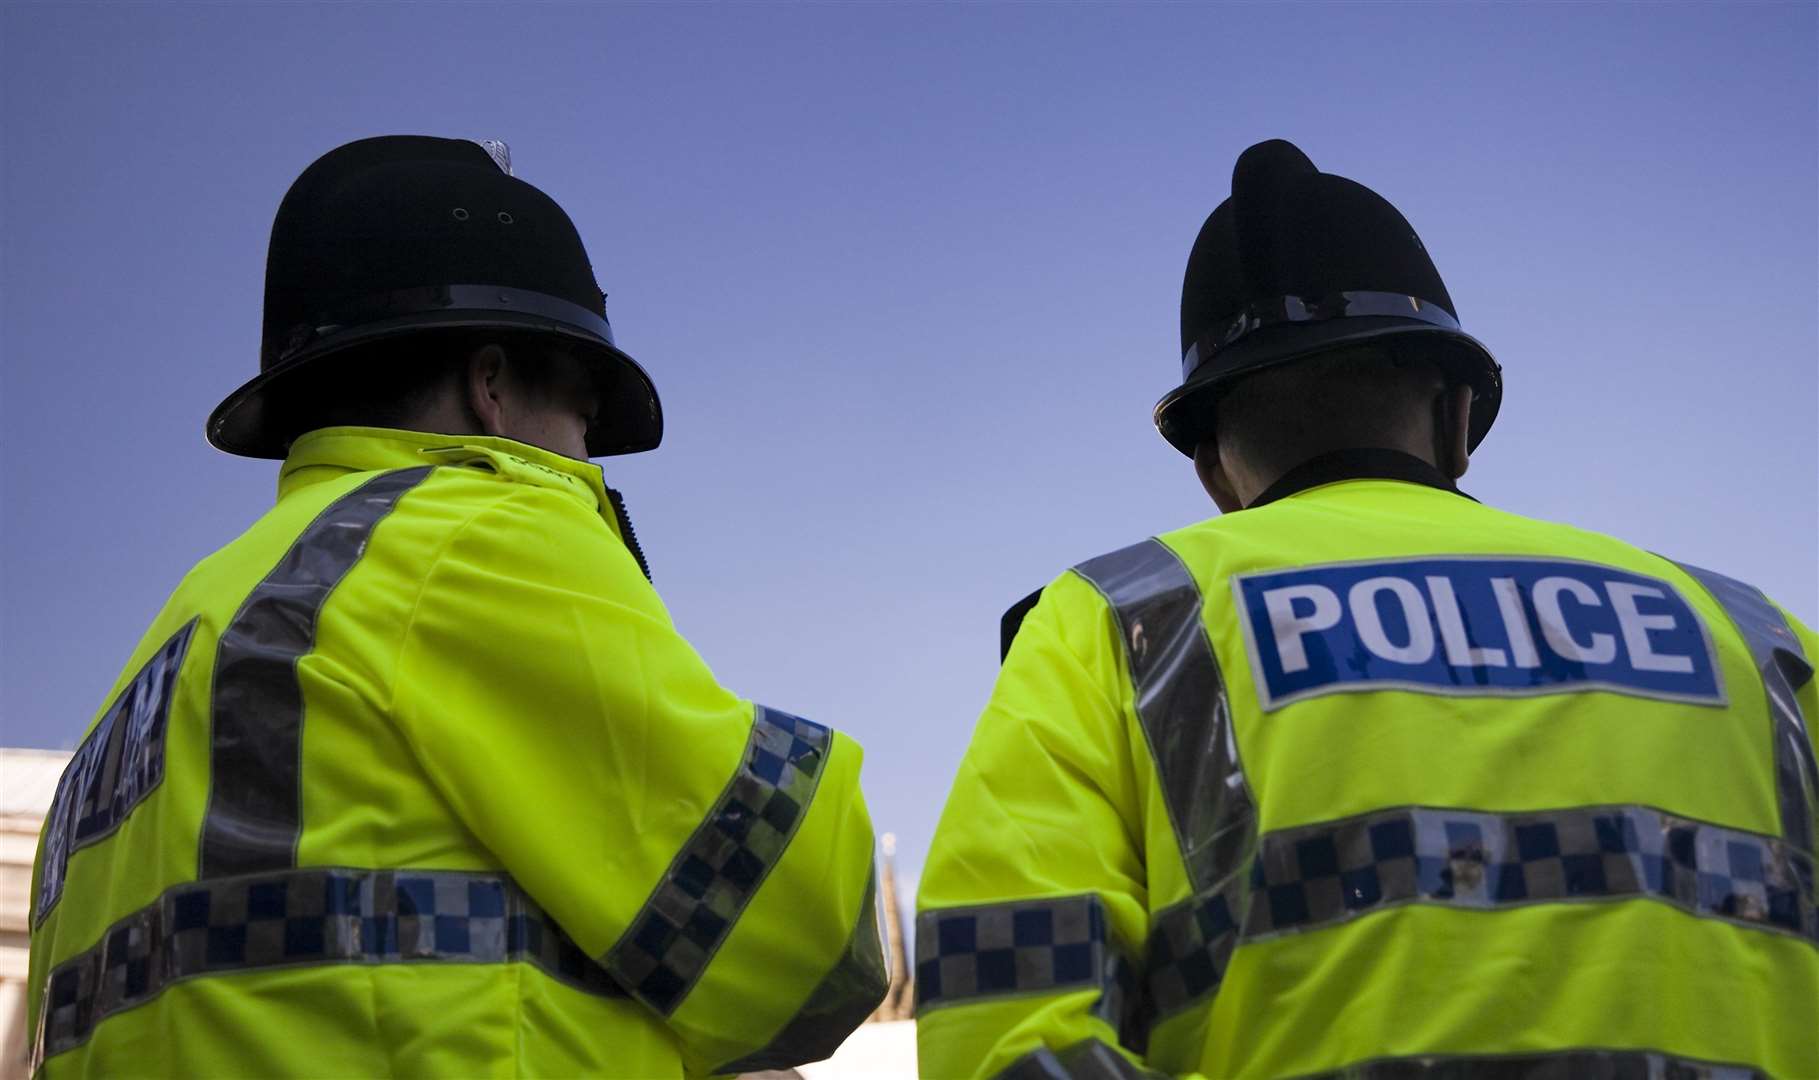 More than 1,200 police officers in Kent were assaulted in a year